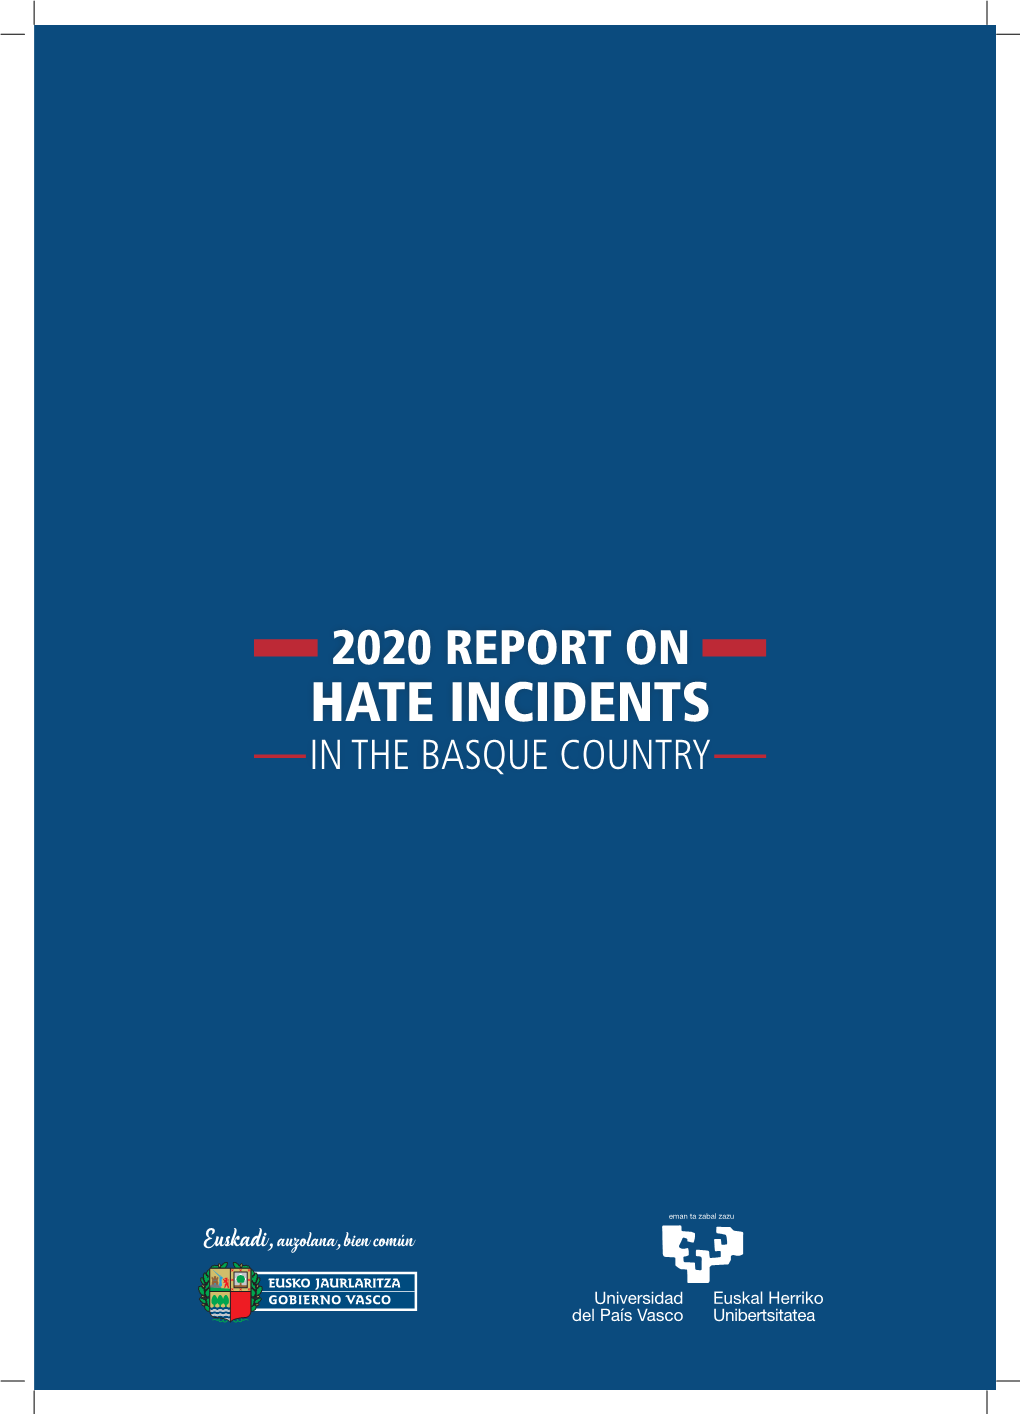 Hate Incidents in the Basque Country 2020 Report on Hate Incidents in the Basque Country